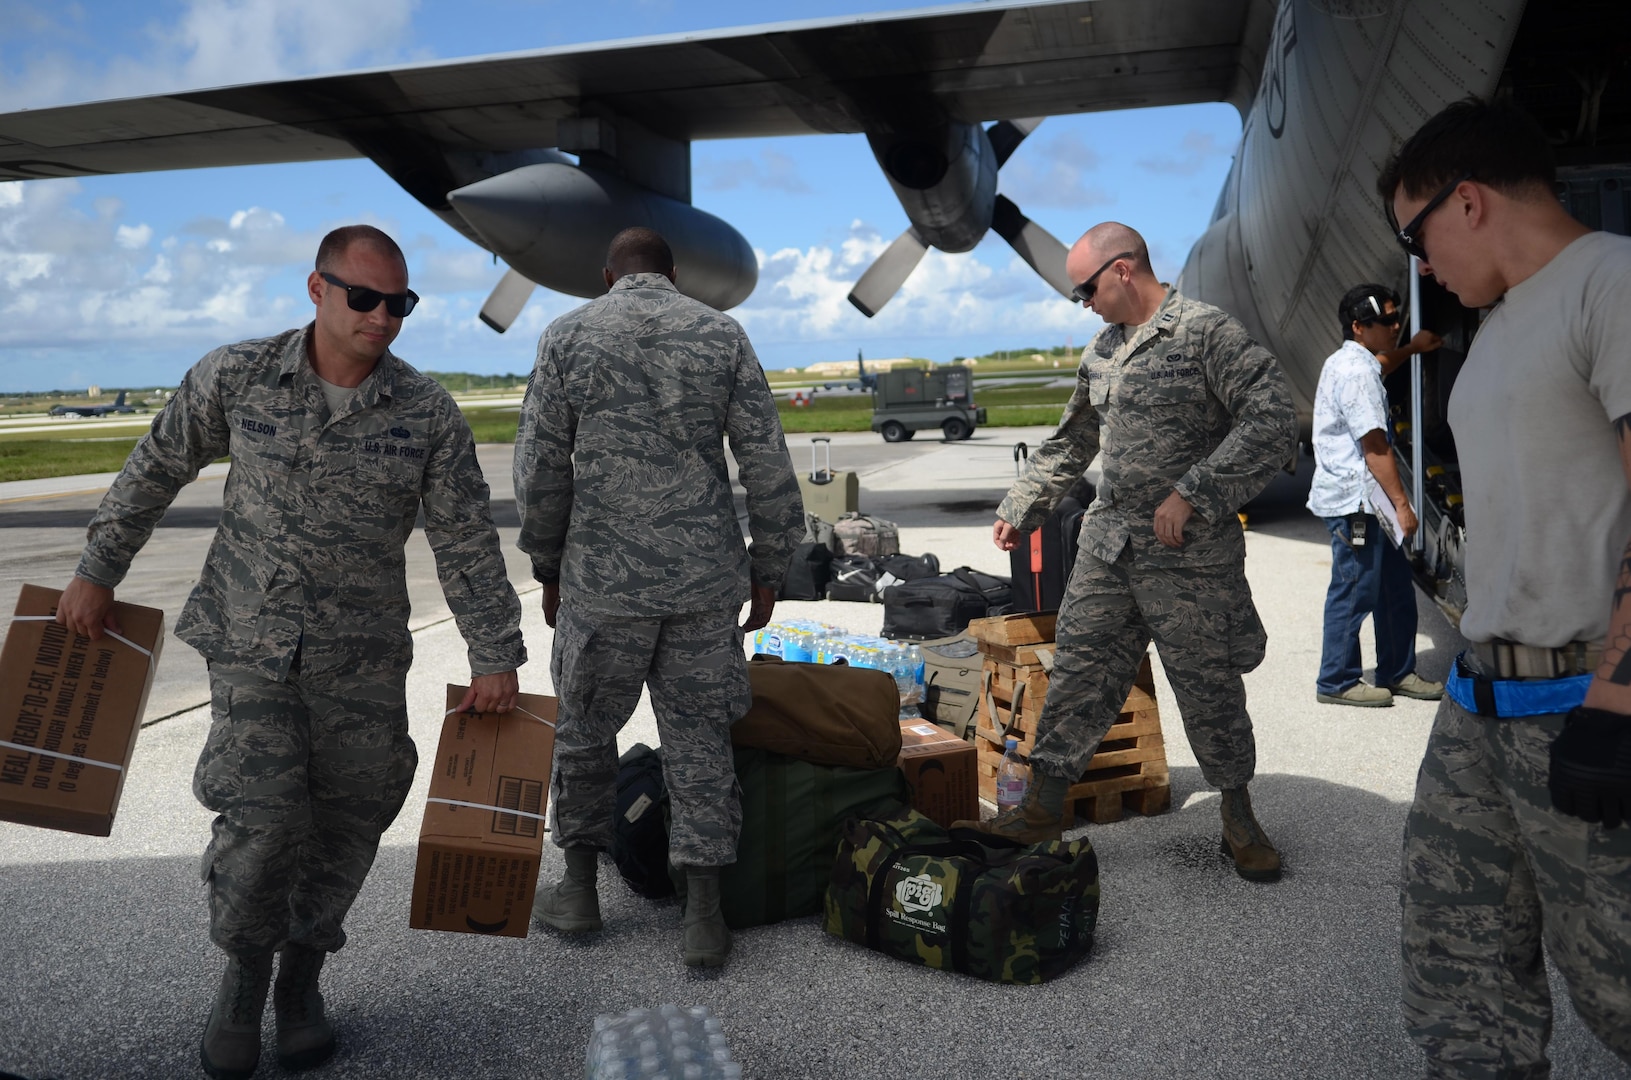 Airmen from the 36th Contingency Response Group load equipment into a C-130 Hercules before departing to support Operation Damayan in Tacloban, Philippines, Nov. 14, 2013, at Andersen Air Force Base, Guam. (U.S. Air Force photo by Airman Marianique Santos )